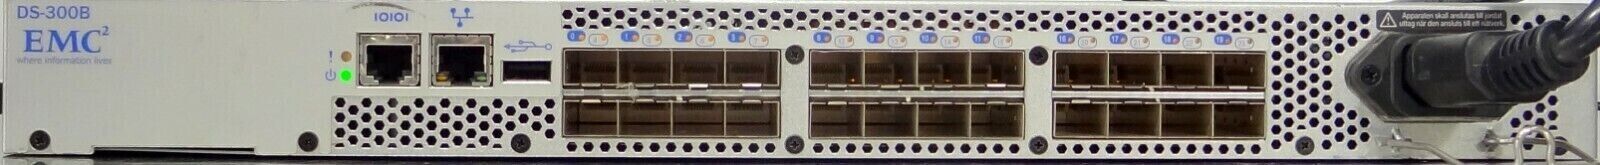 EMC Brocade DS-300B 24-Port Fibre Channel Switch with 12x SFPs, Tested & Working